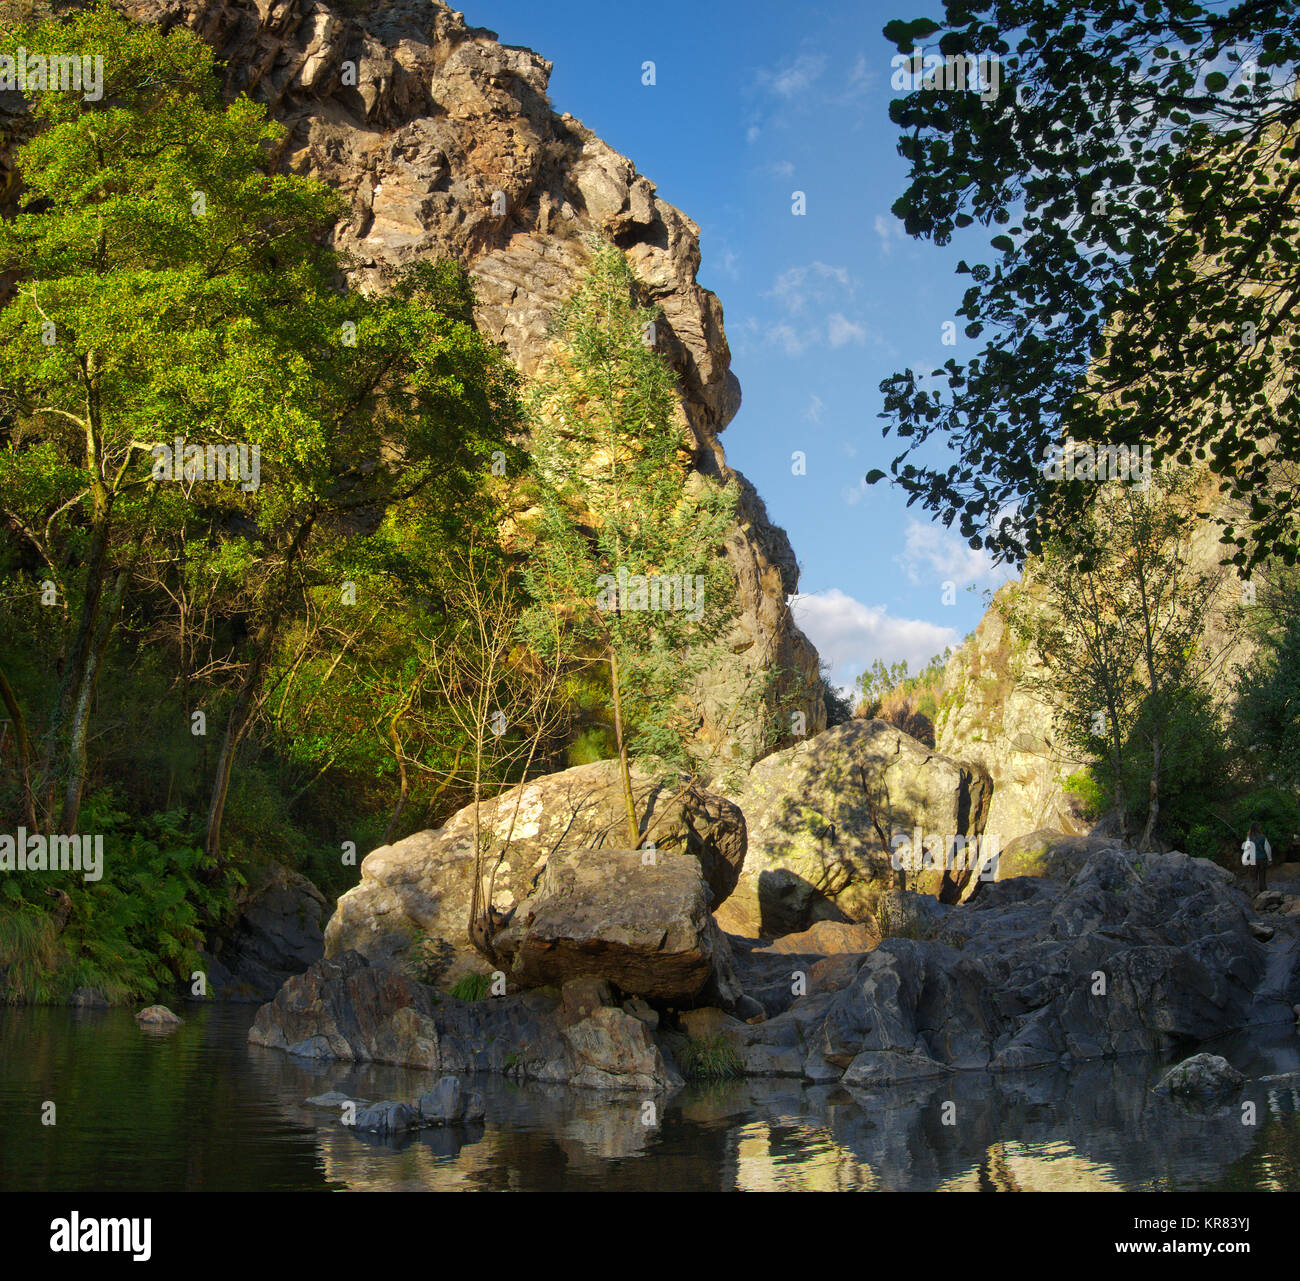 A Small island of eroded rocks and boulders in the middle of River Alge at Fragas de Sao Simao. Green trees and canyon cliffs on background. Figueiro  Stock Photo